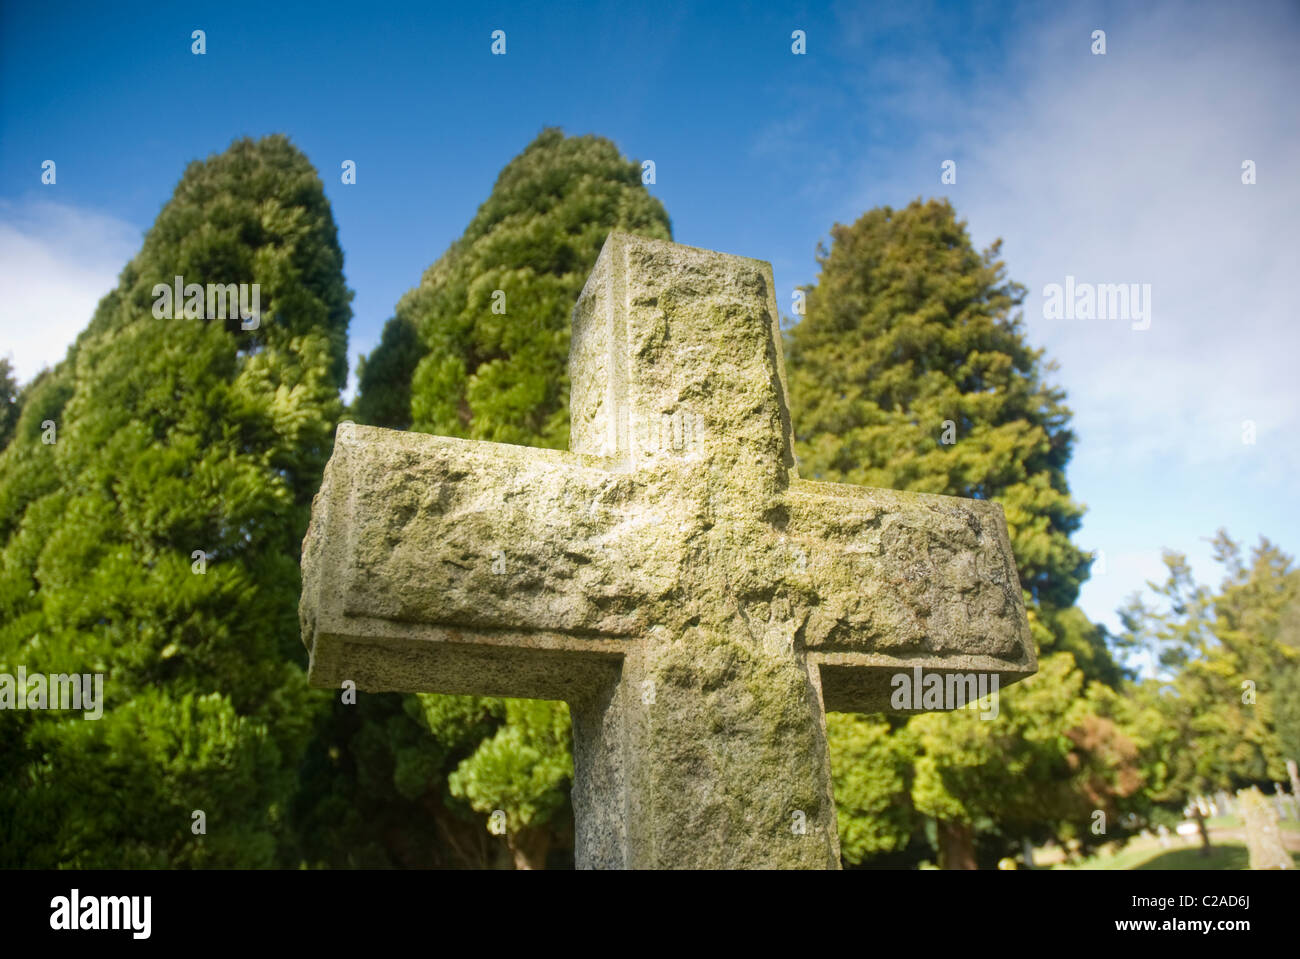 Gravestone and yew trees in the sun in Penrith, Cumbria Stock Photo